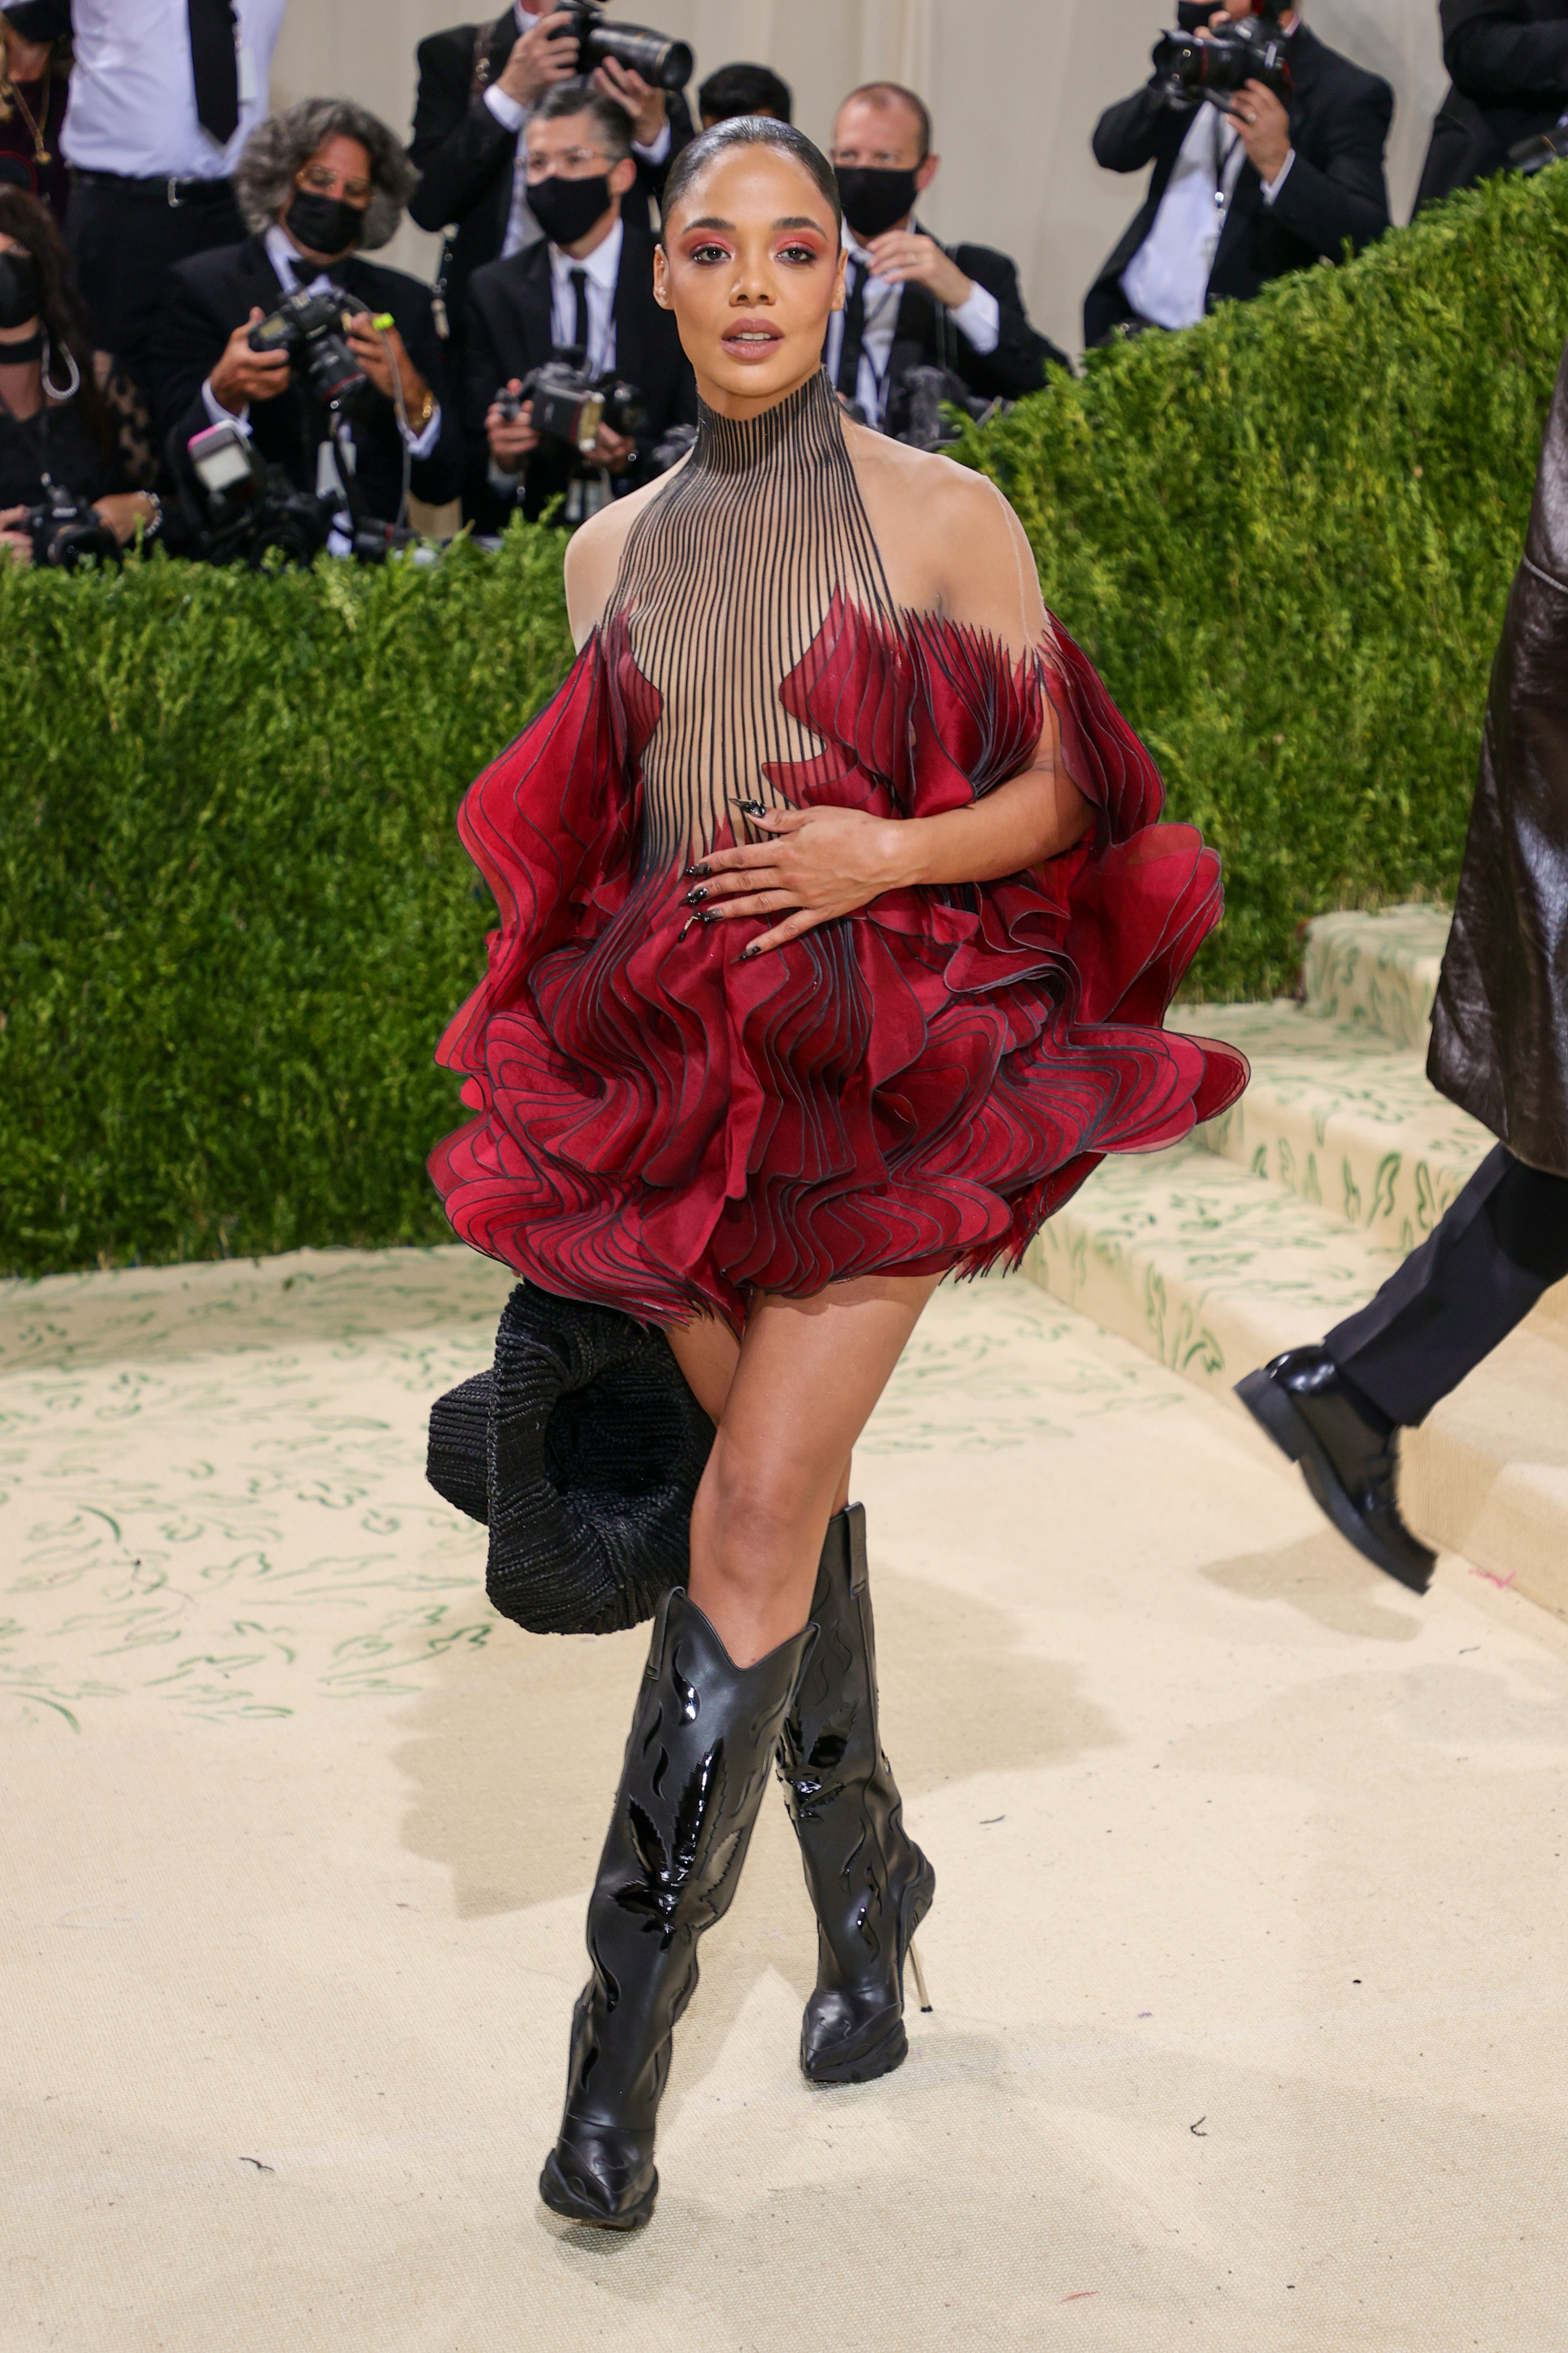 NEW YORK, NEW YORK - SEPTEMBER 13: Tessa Thompson attends The 2021 Met Gala Celebrating In America: A Lexicon Of Fashion at Metropolitan Museum of Art on September 13, 2021 in New York City. (Photo by Theo Wargo/Getty Images) (Foto: Getty Images)